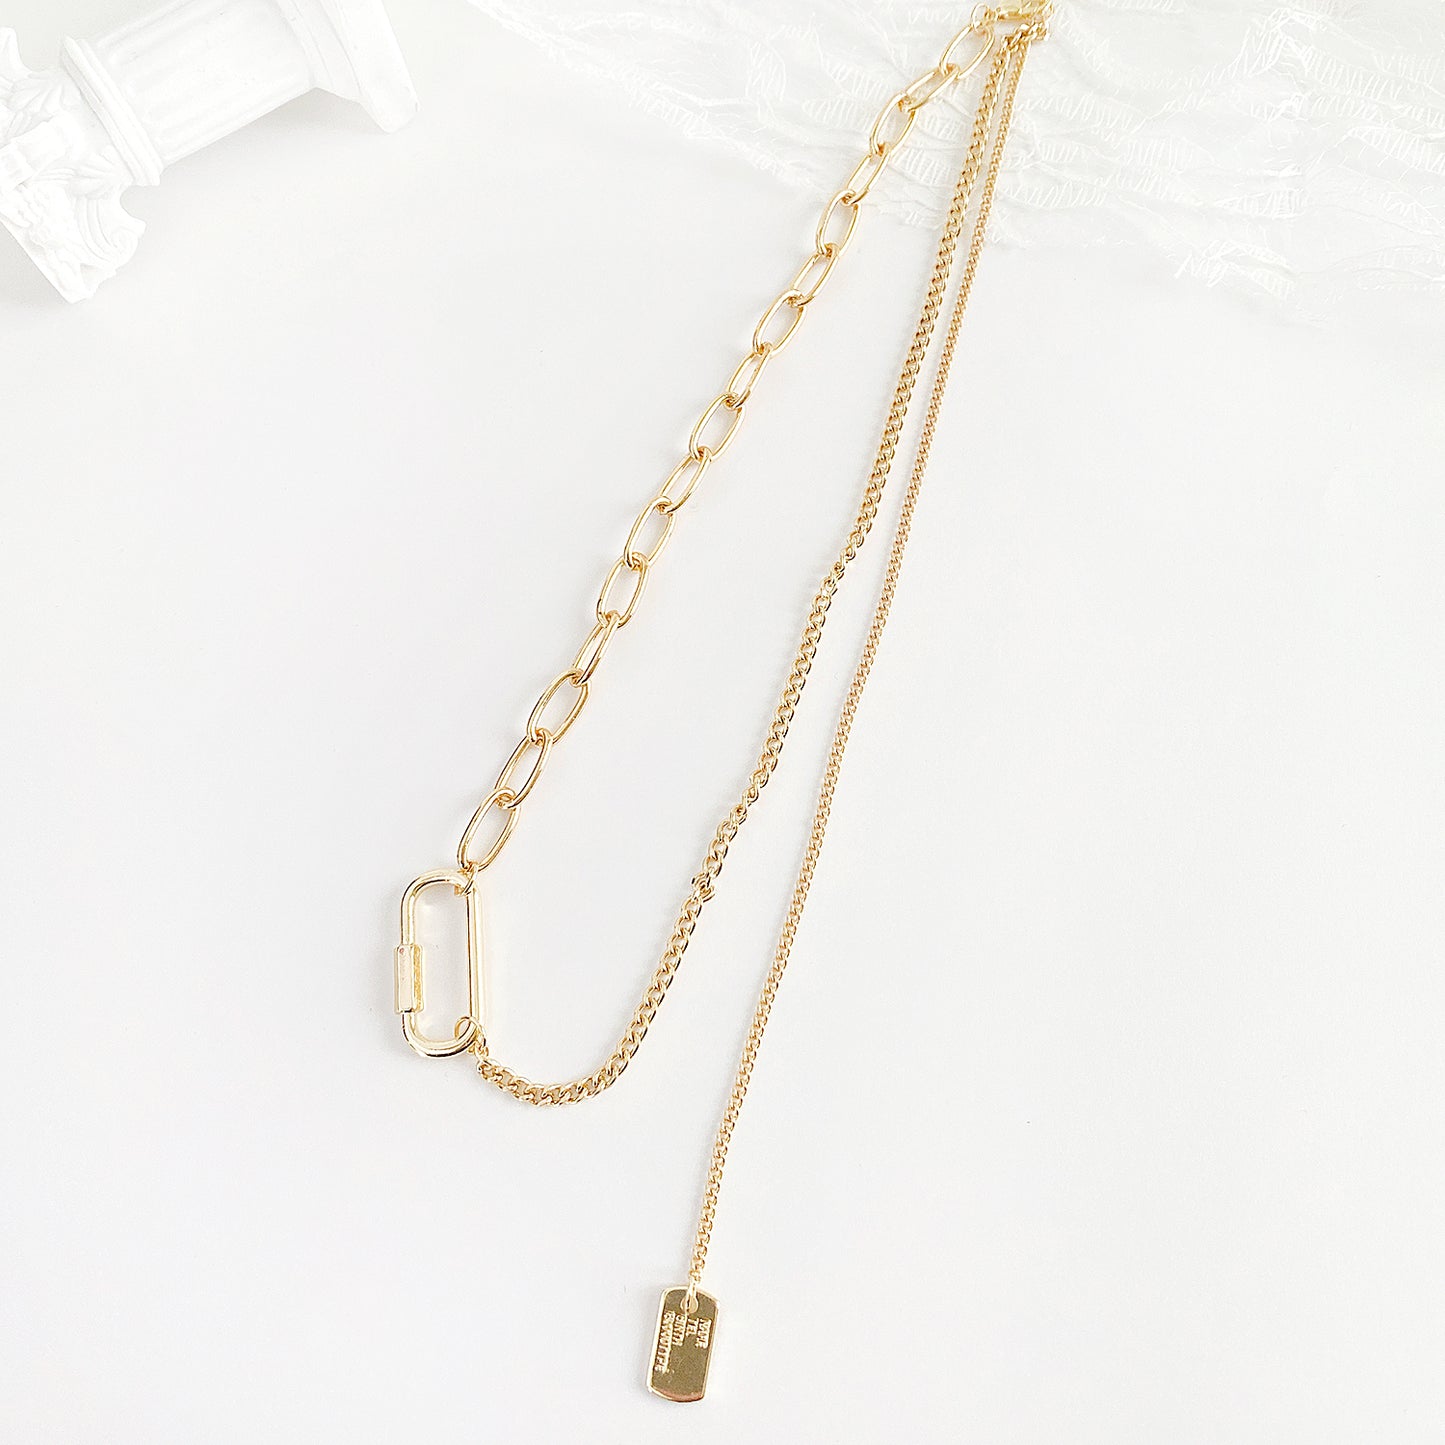 Mini Dog Tag Asymmetry Chain Necklace - YOUAREMYPOISON